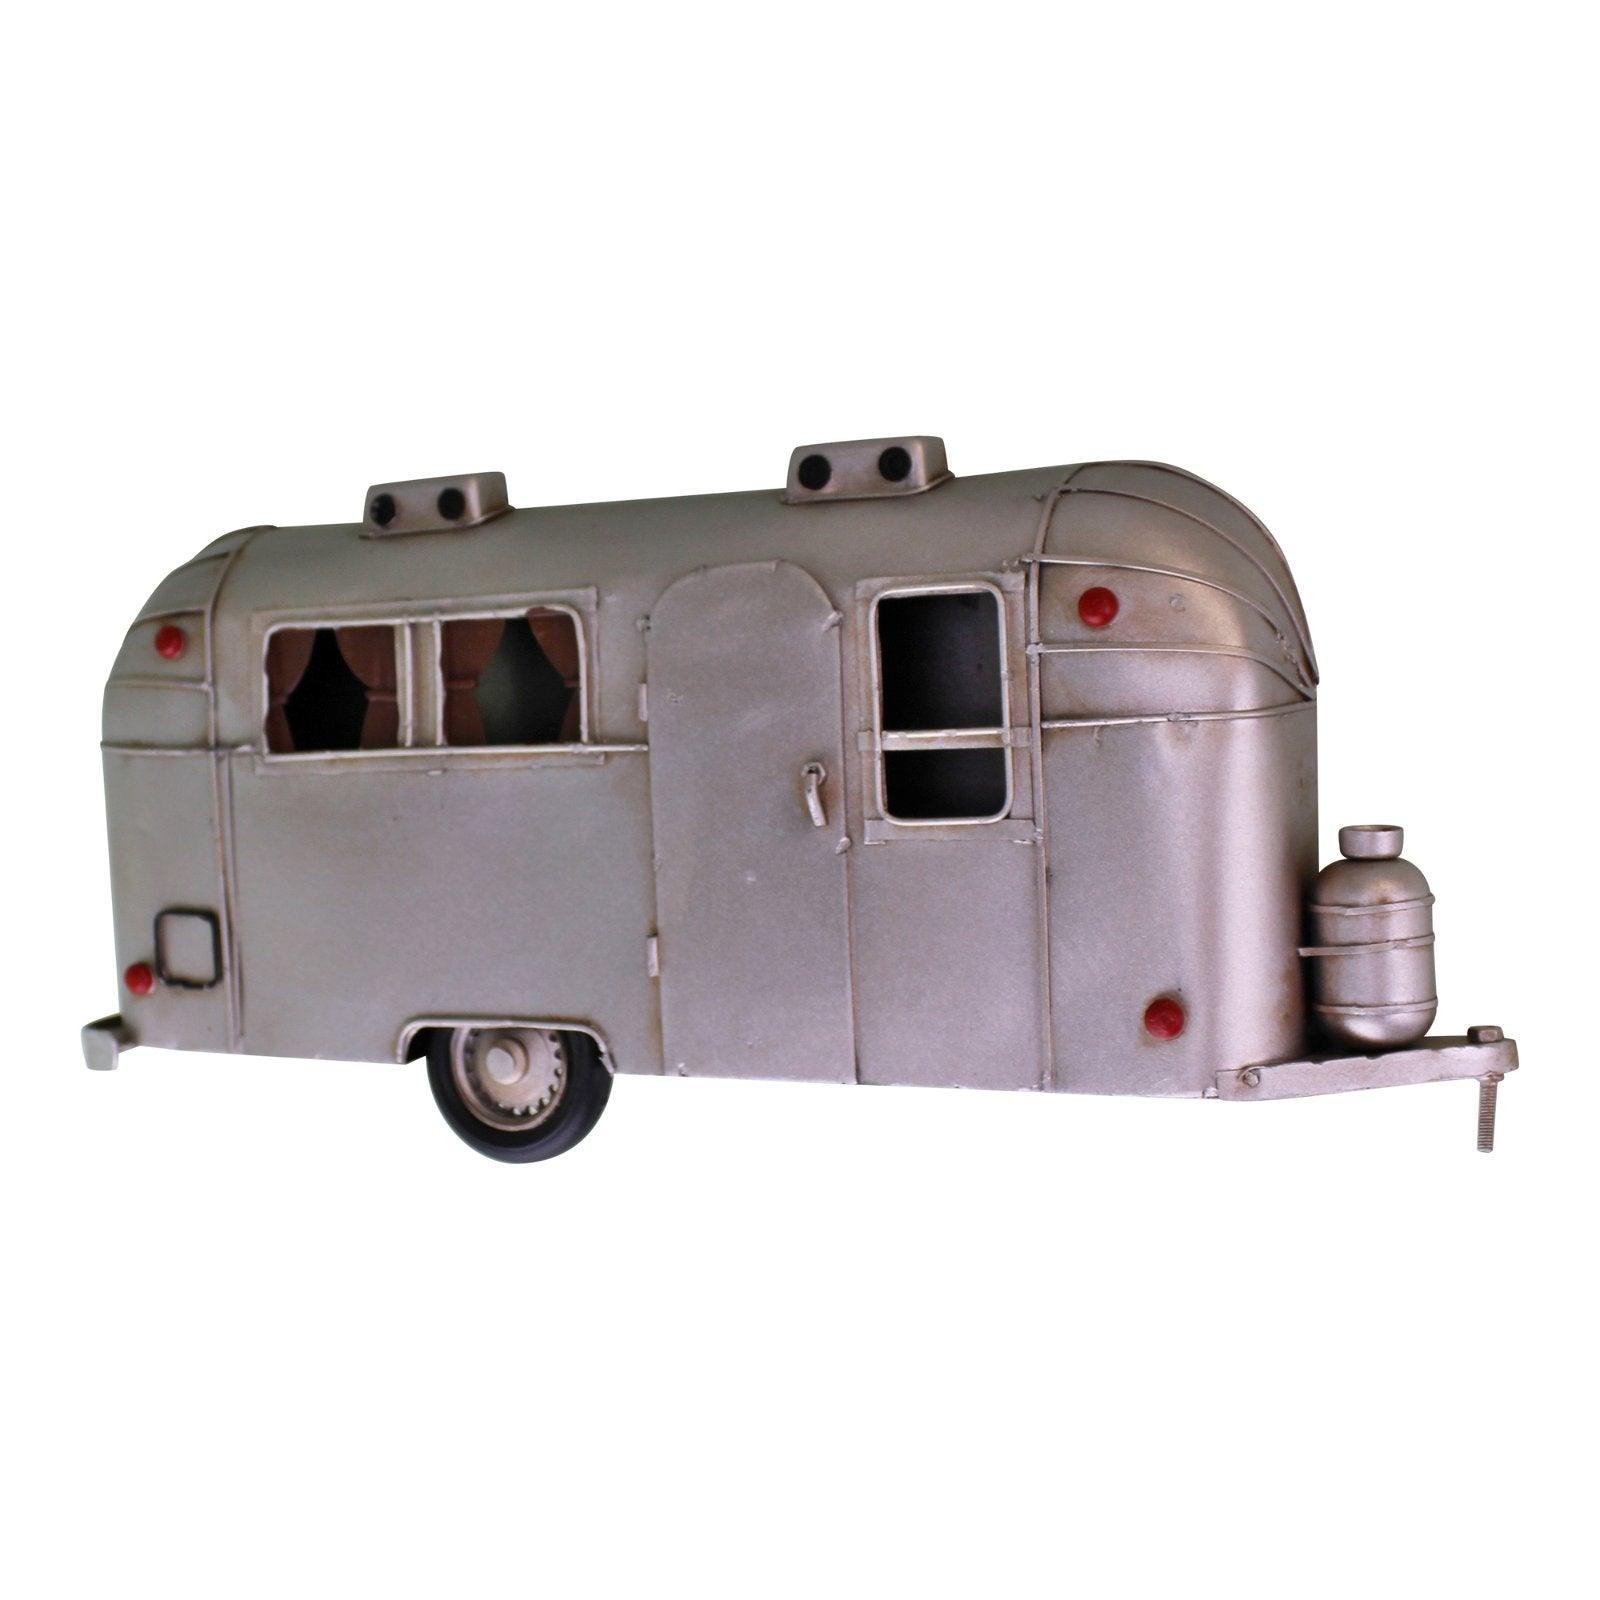 View Wall Hanging Silver Metal Camper Decoration information